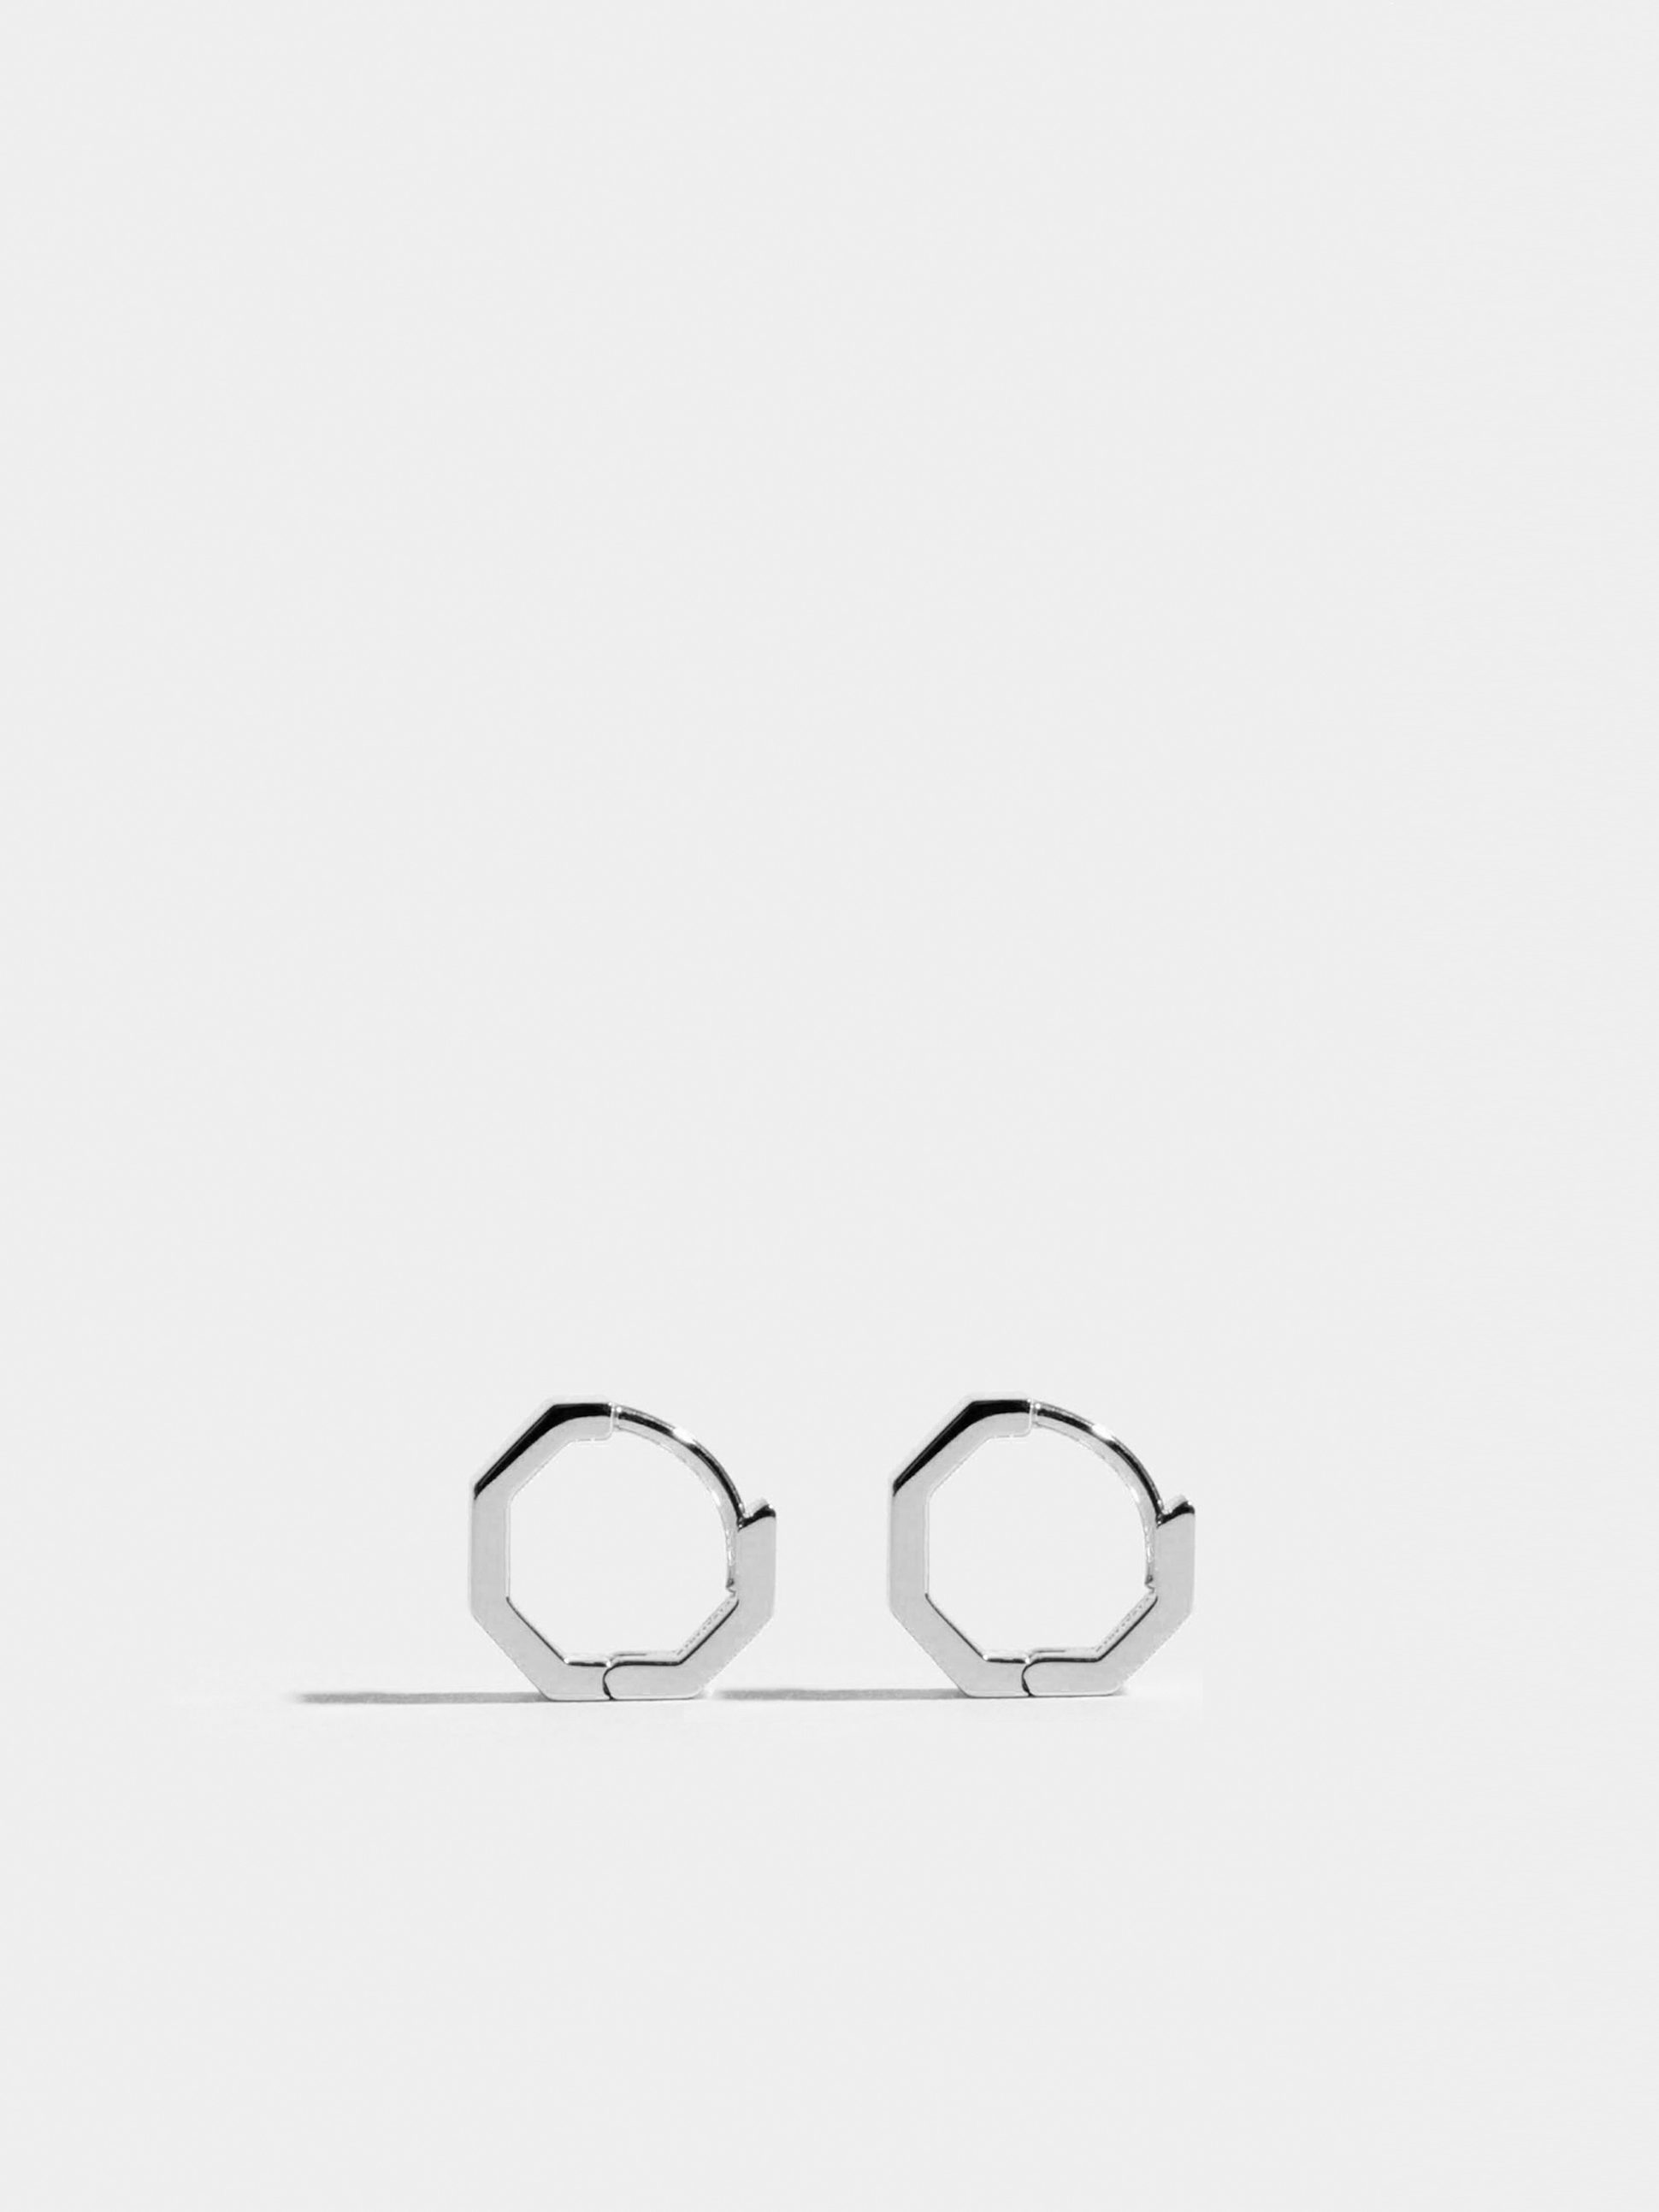 Octogone 10mm earrings in 18k Fairmined ethical white gold, paved with lab-grown diamonds, the pair.